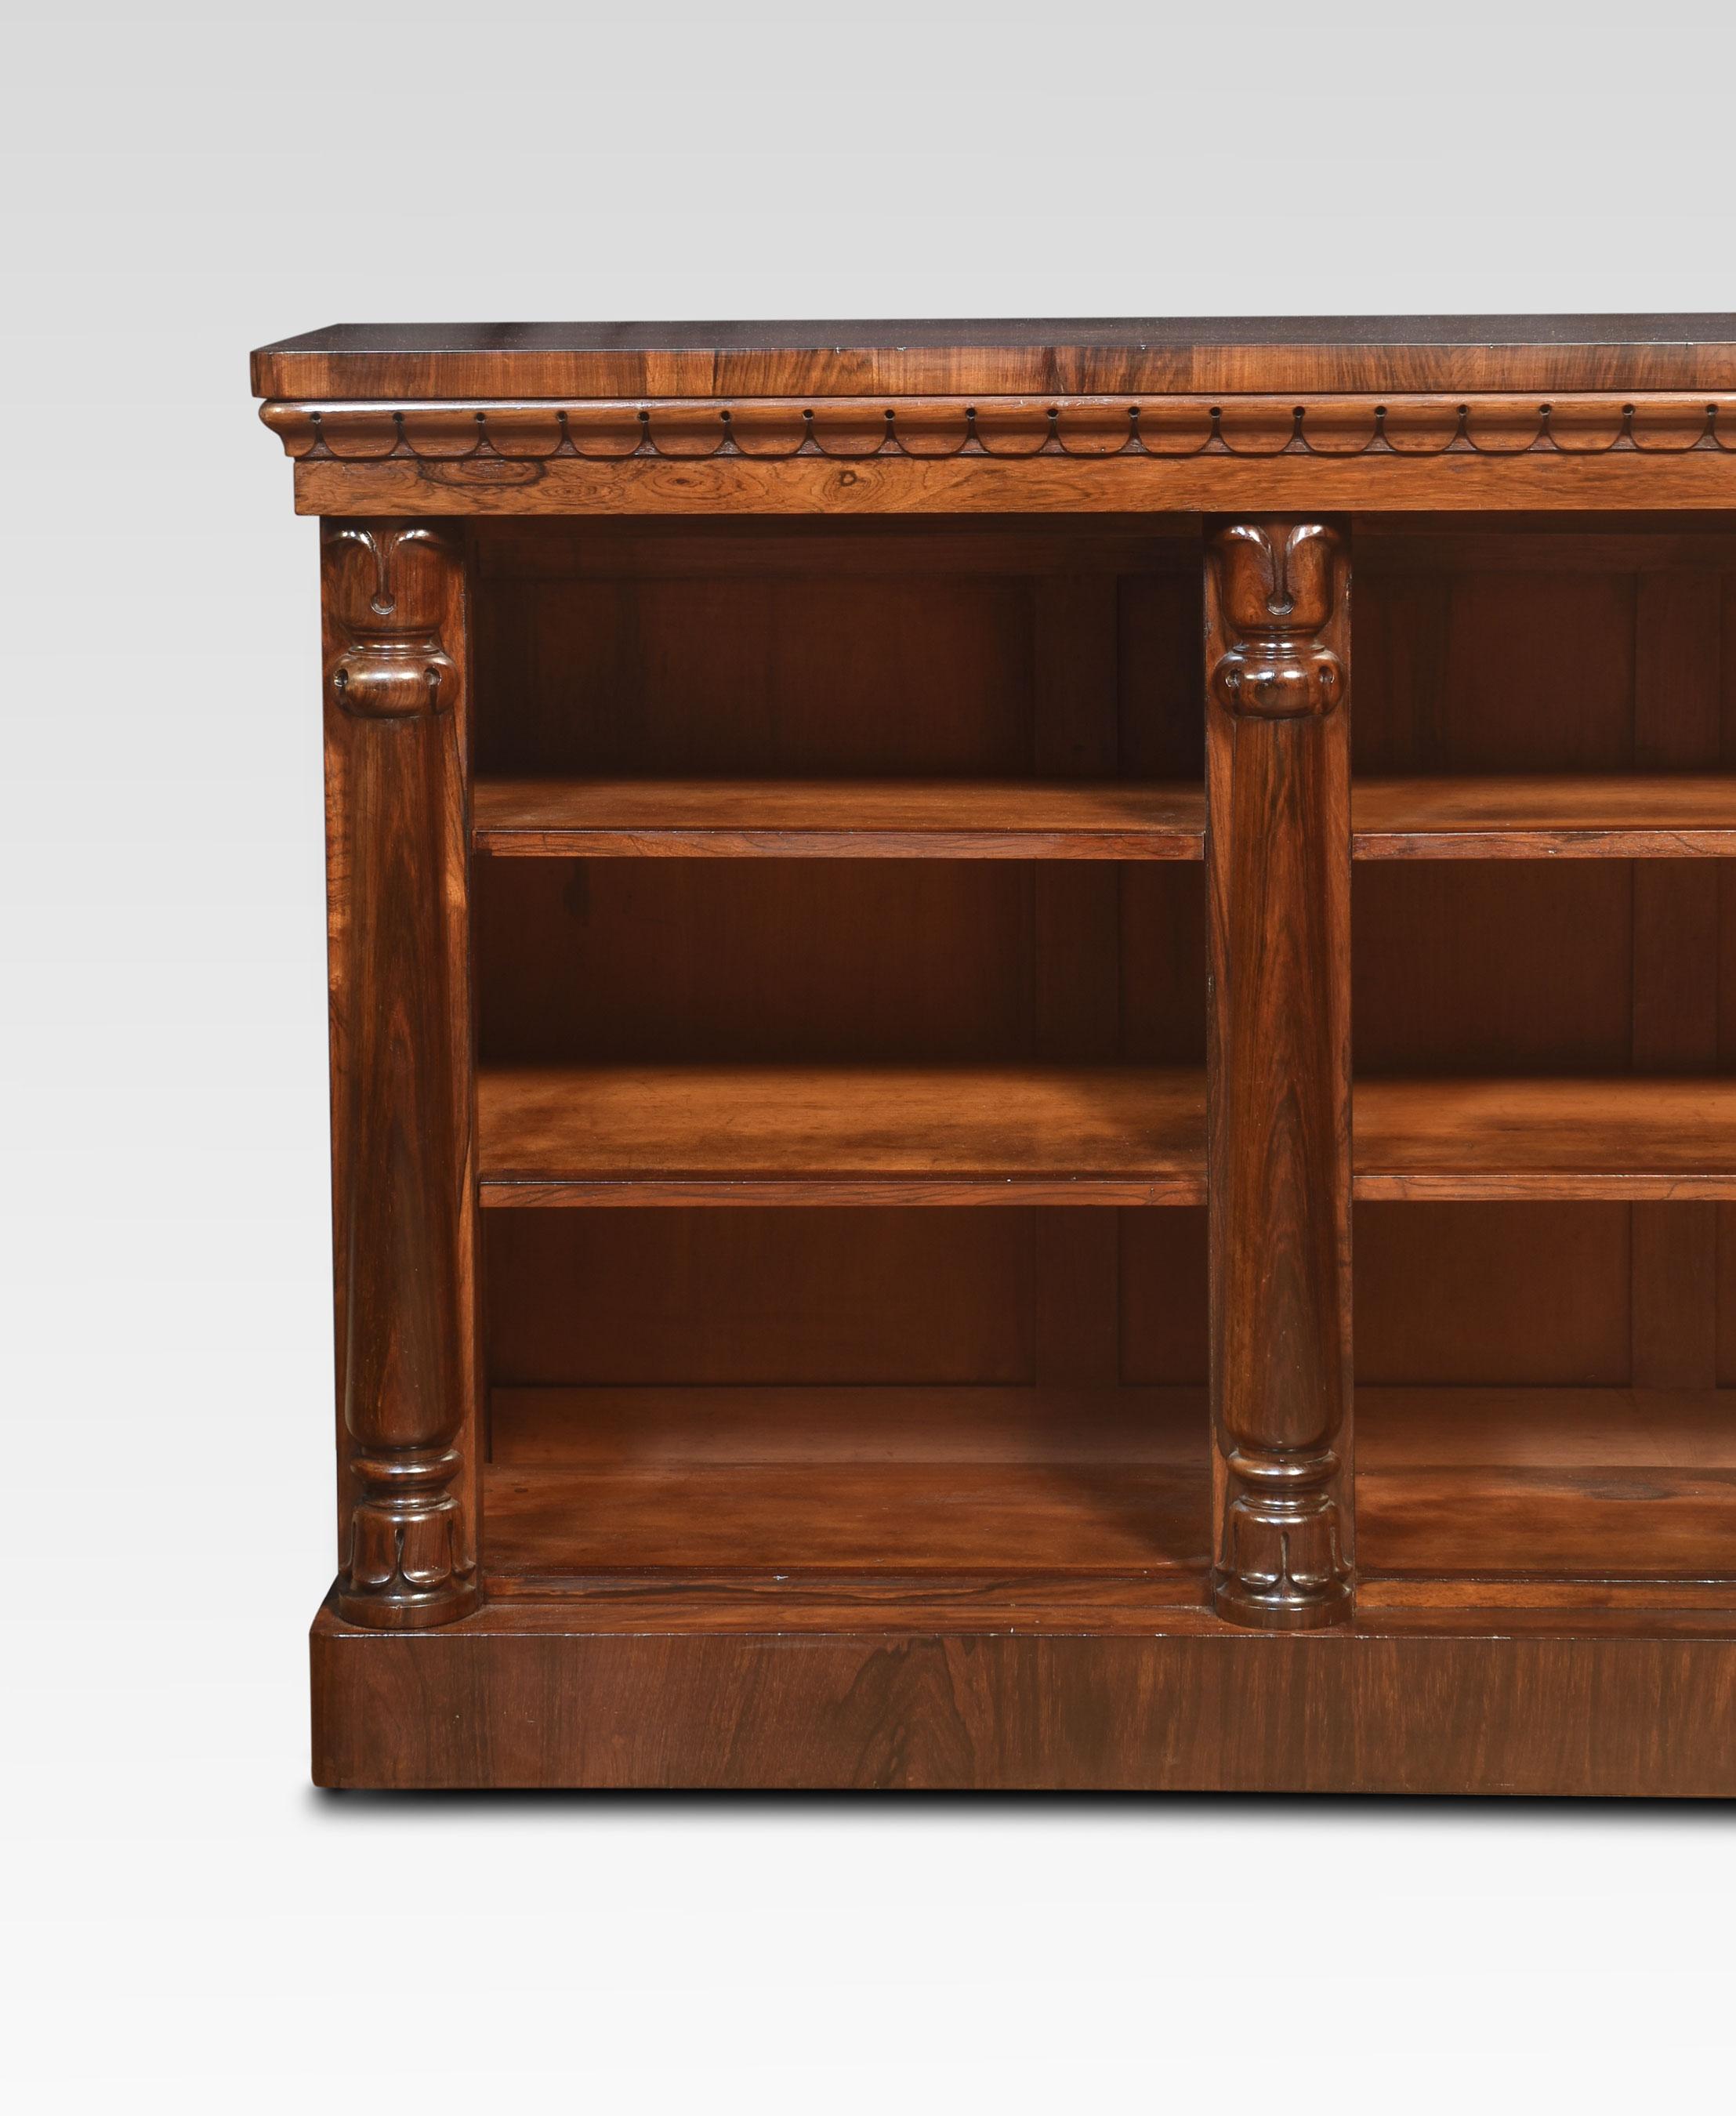 Rosewood open bookcase, the large rectangular well-figured top above three bays of adjustable shelves, divided by turned column pilasters. All raised up on a plinth base.
Dimensions
Height 36.5 Inches
Width 72 Inches
Depth 15.5 Inches.